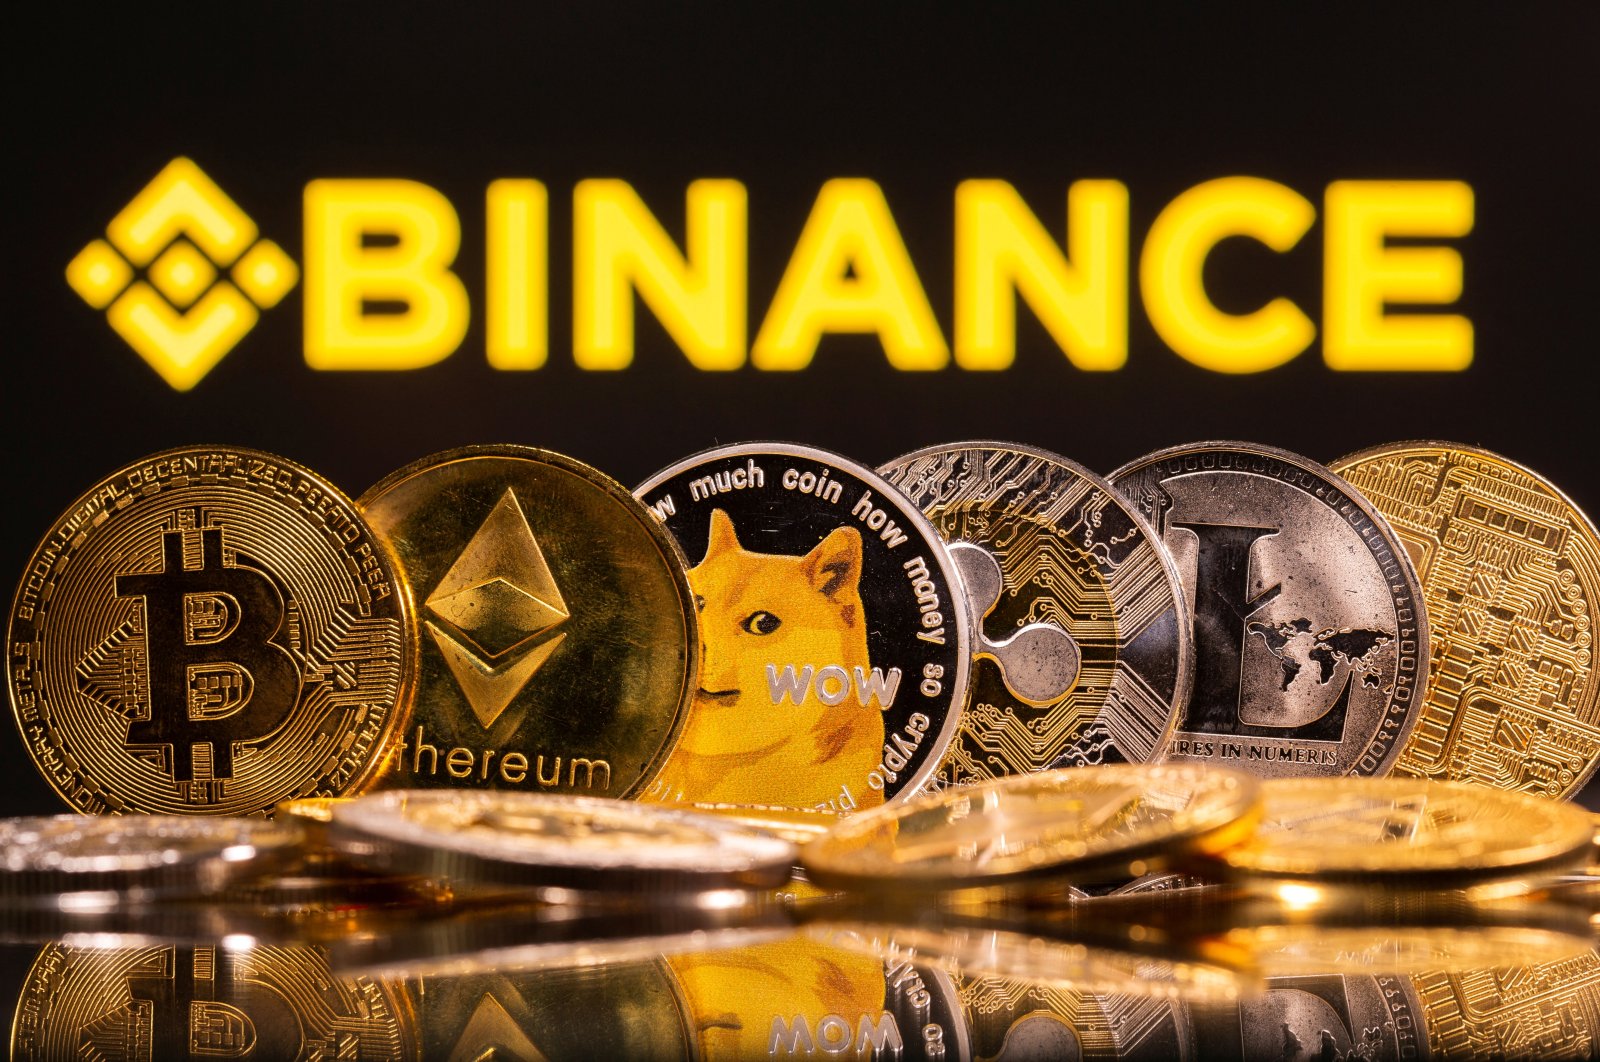 Representations of the cryptocurrencies Bitcoin, Ethereum, DogeCoin, Ripple and Litecoin are seen in front of a Binance logo in this illustration, June 28, 2021. (Reuters Photo)